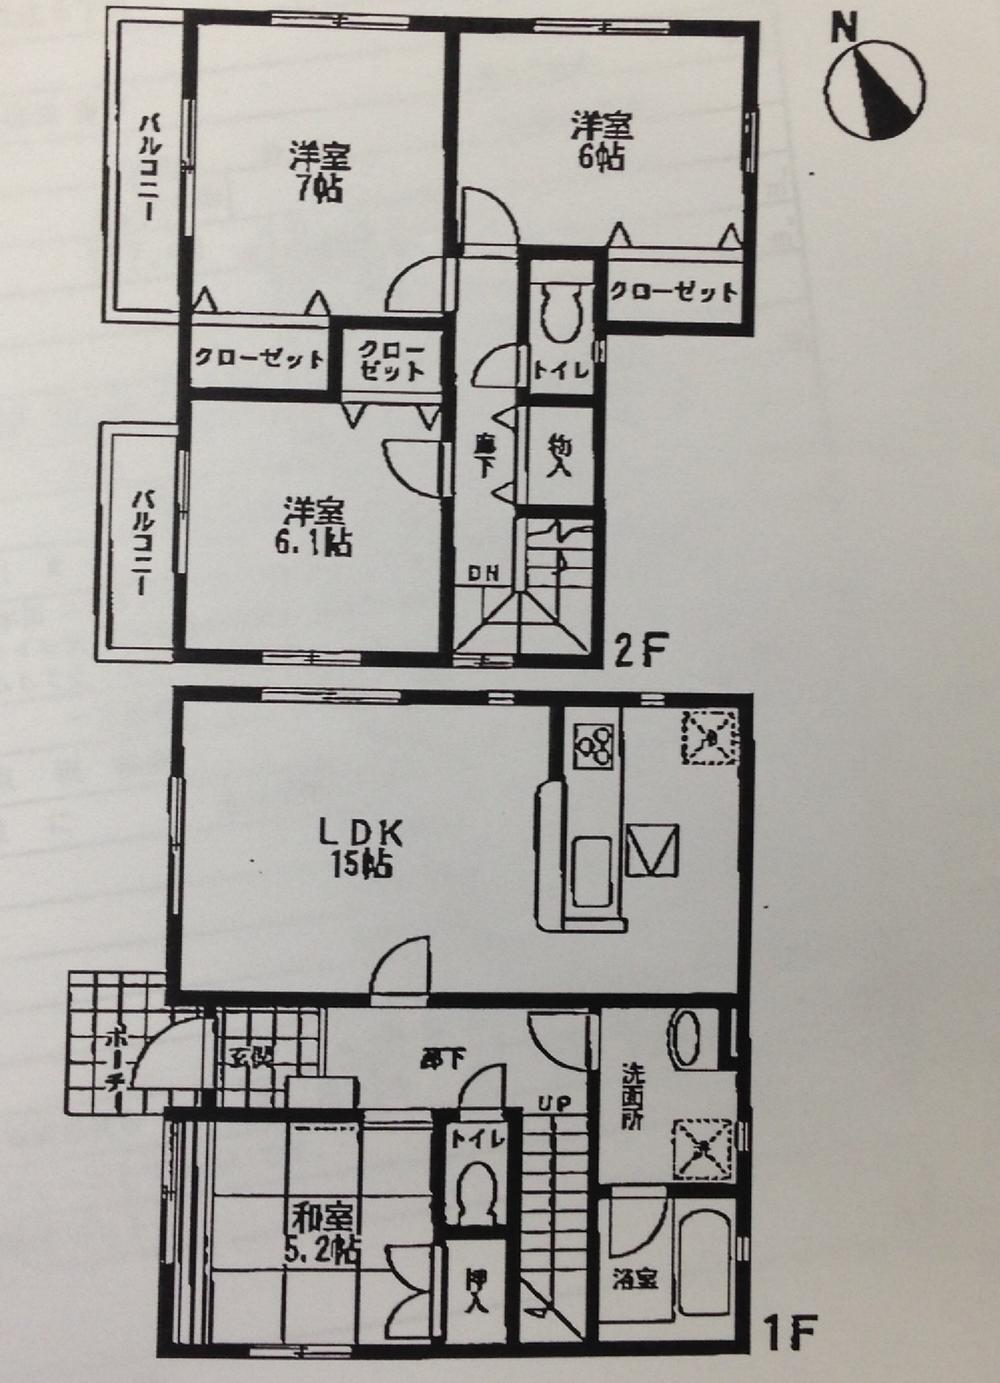 Floor plan. 21,800,000 yen, 4LDK, Land area 108.15 sq m , Spacious space of building area 95.37 sq m 100 sq m or more of 4LDK